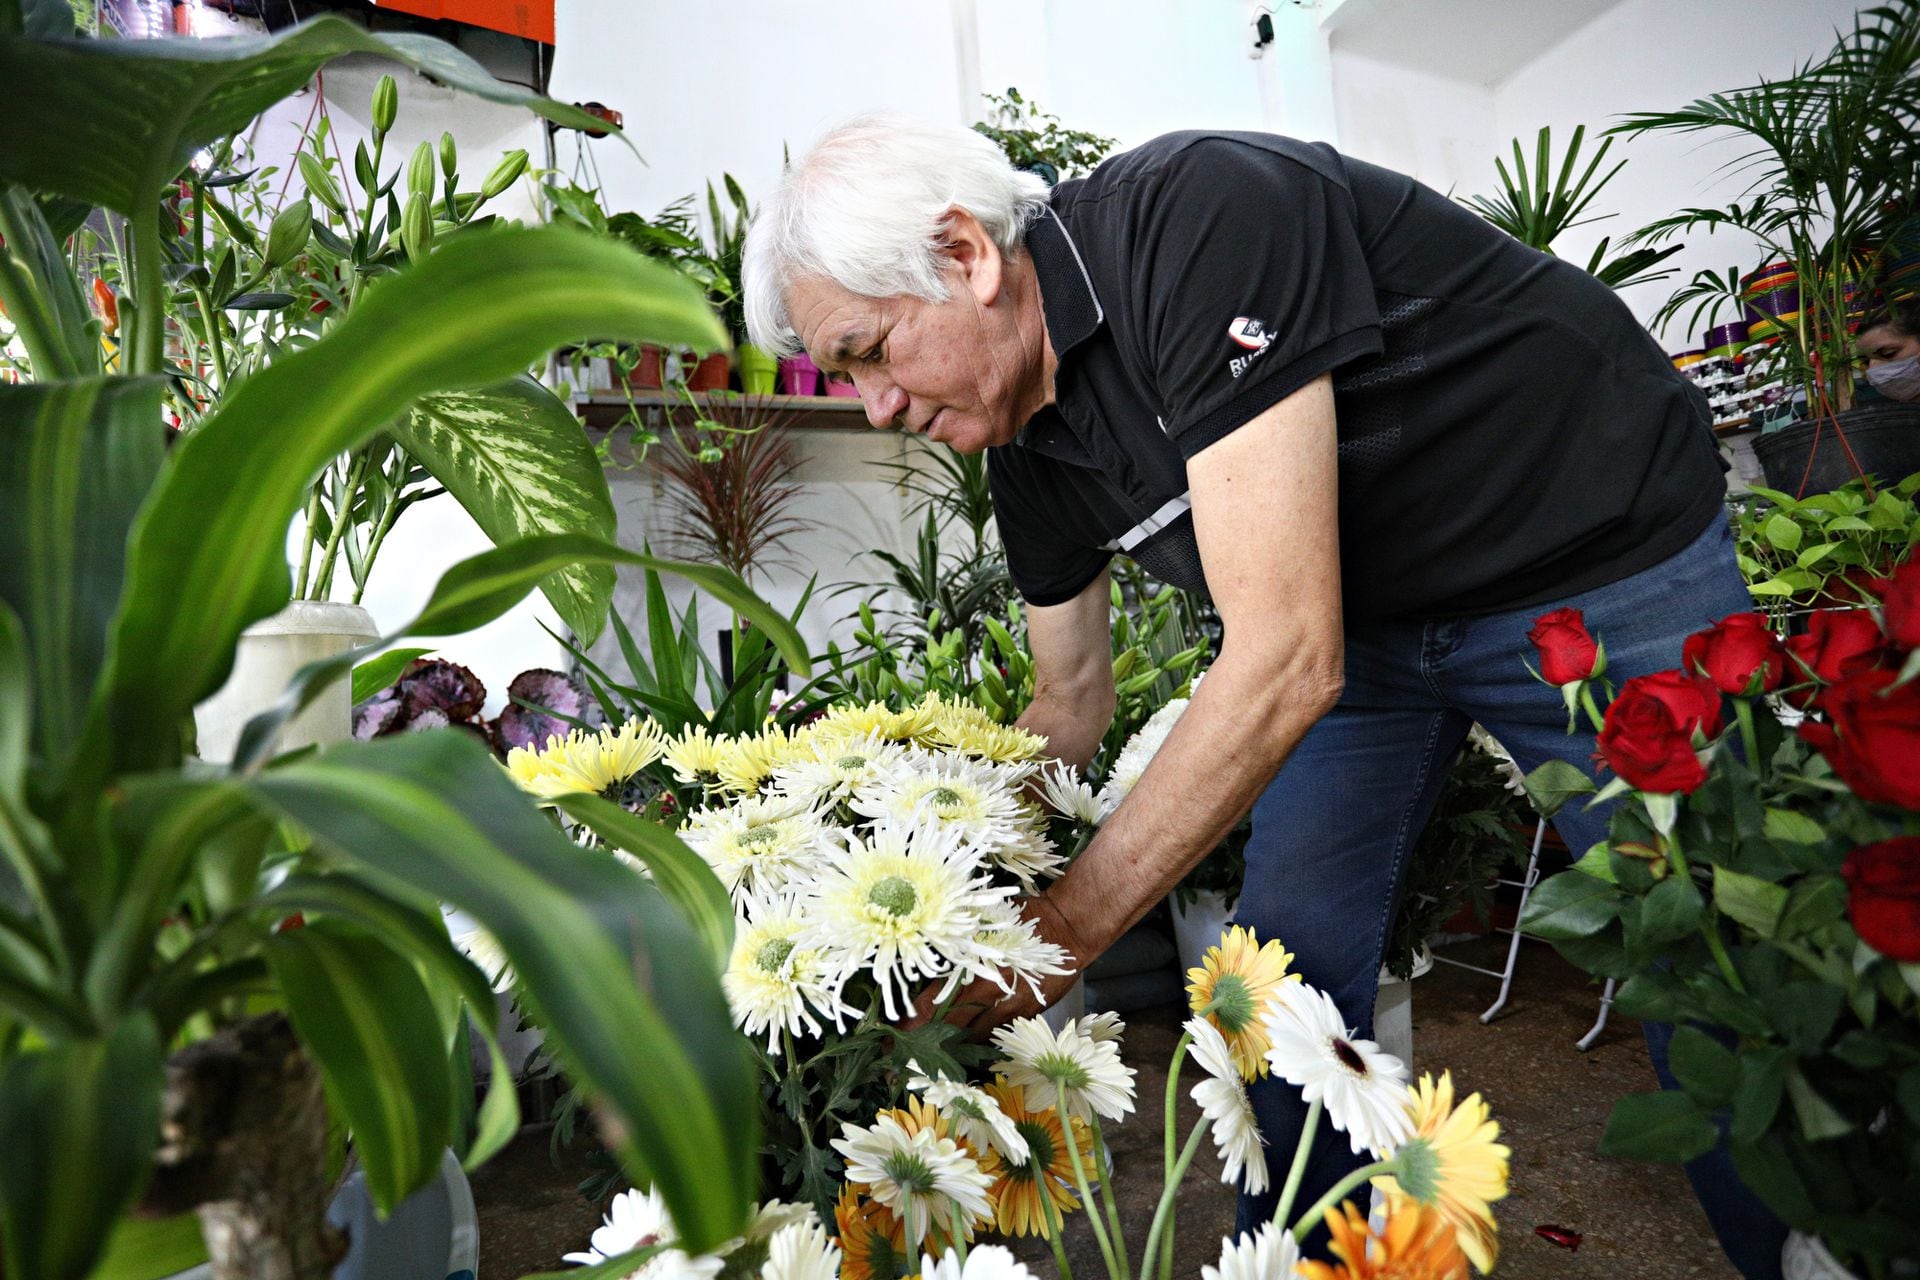 Photos of the Don Oscar flower shop located in Independencia and Chacabuco where his niece Eliana also works.